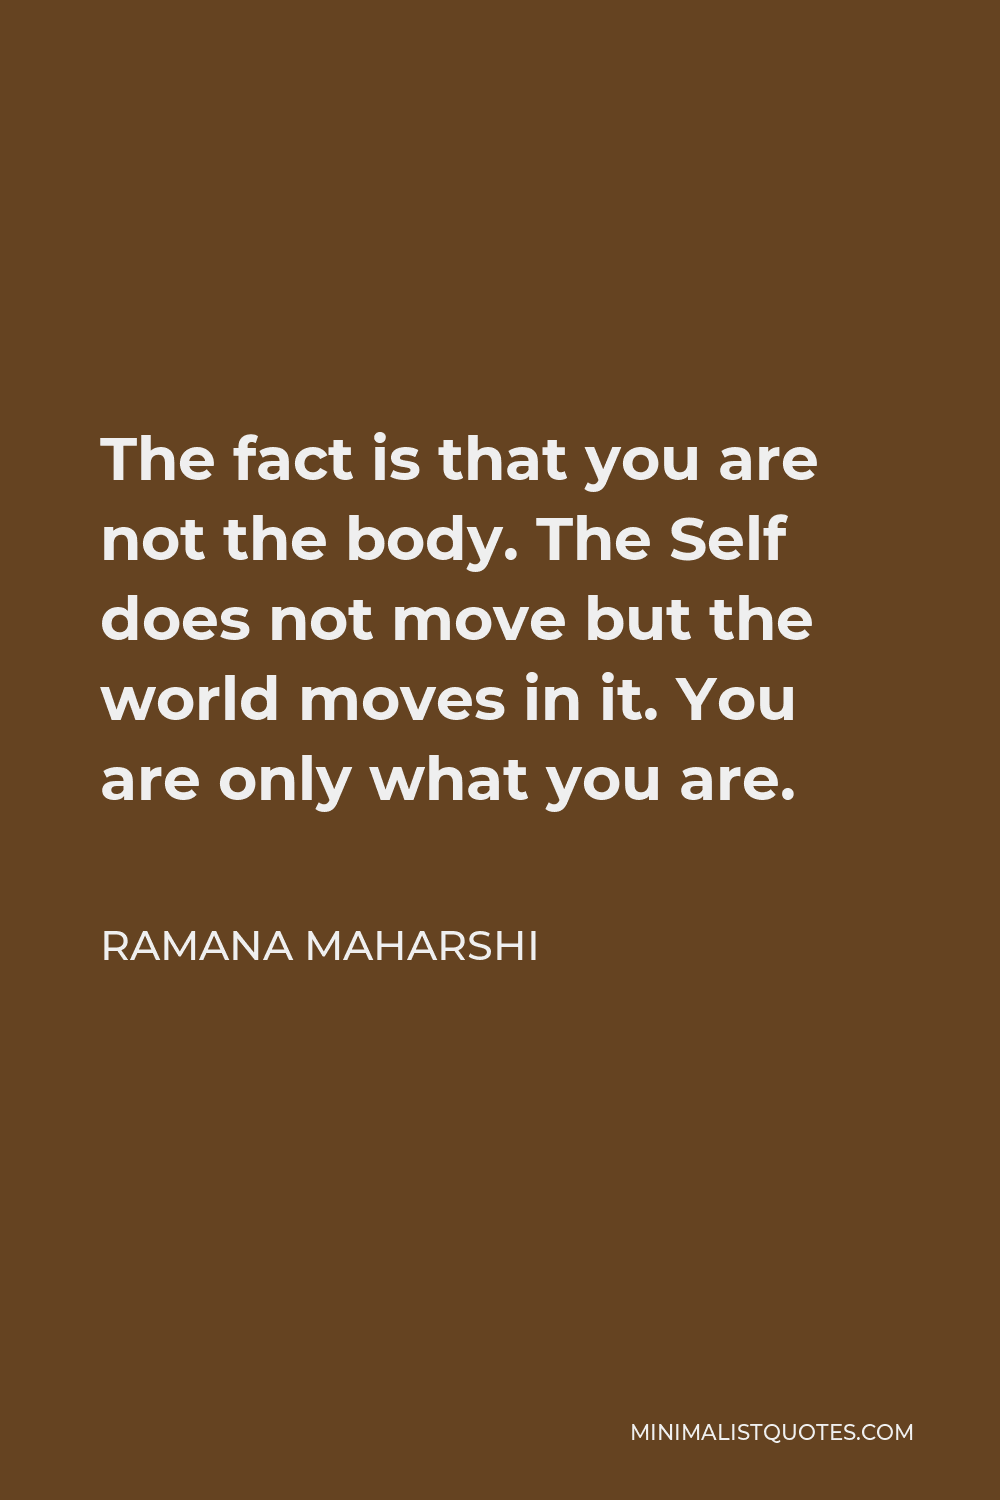 Ramana Maharshi Quote - The fact is that you are not the body. The Self does not move but the world moves in it. You are only what you are.